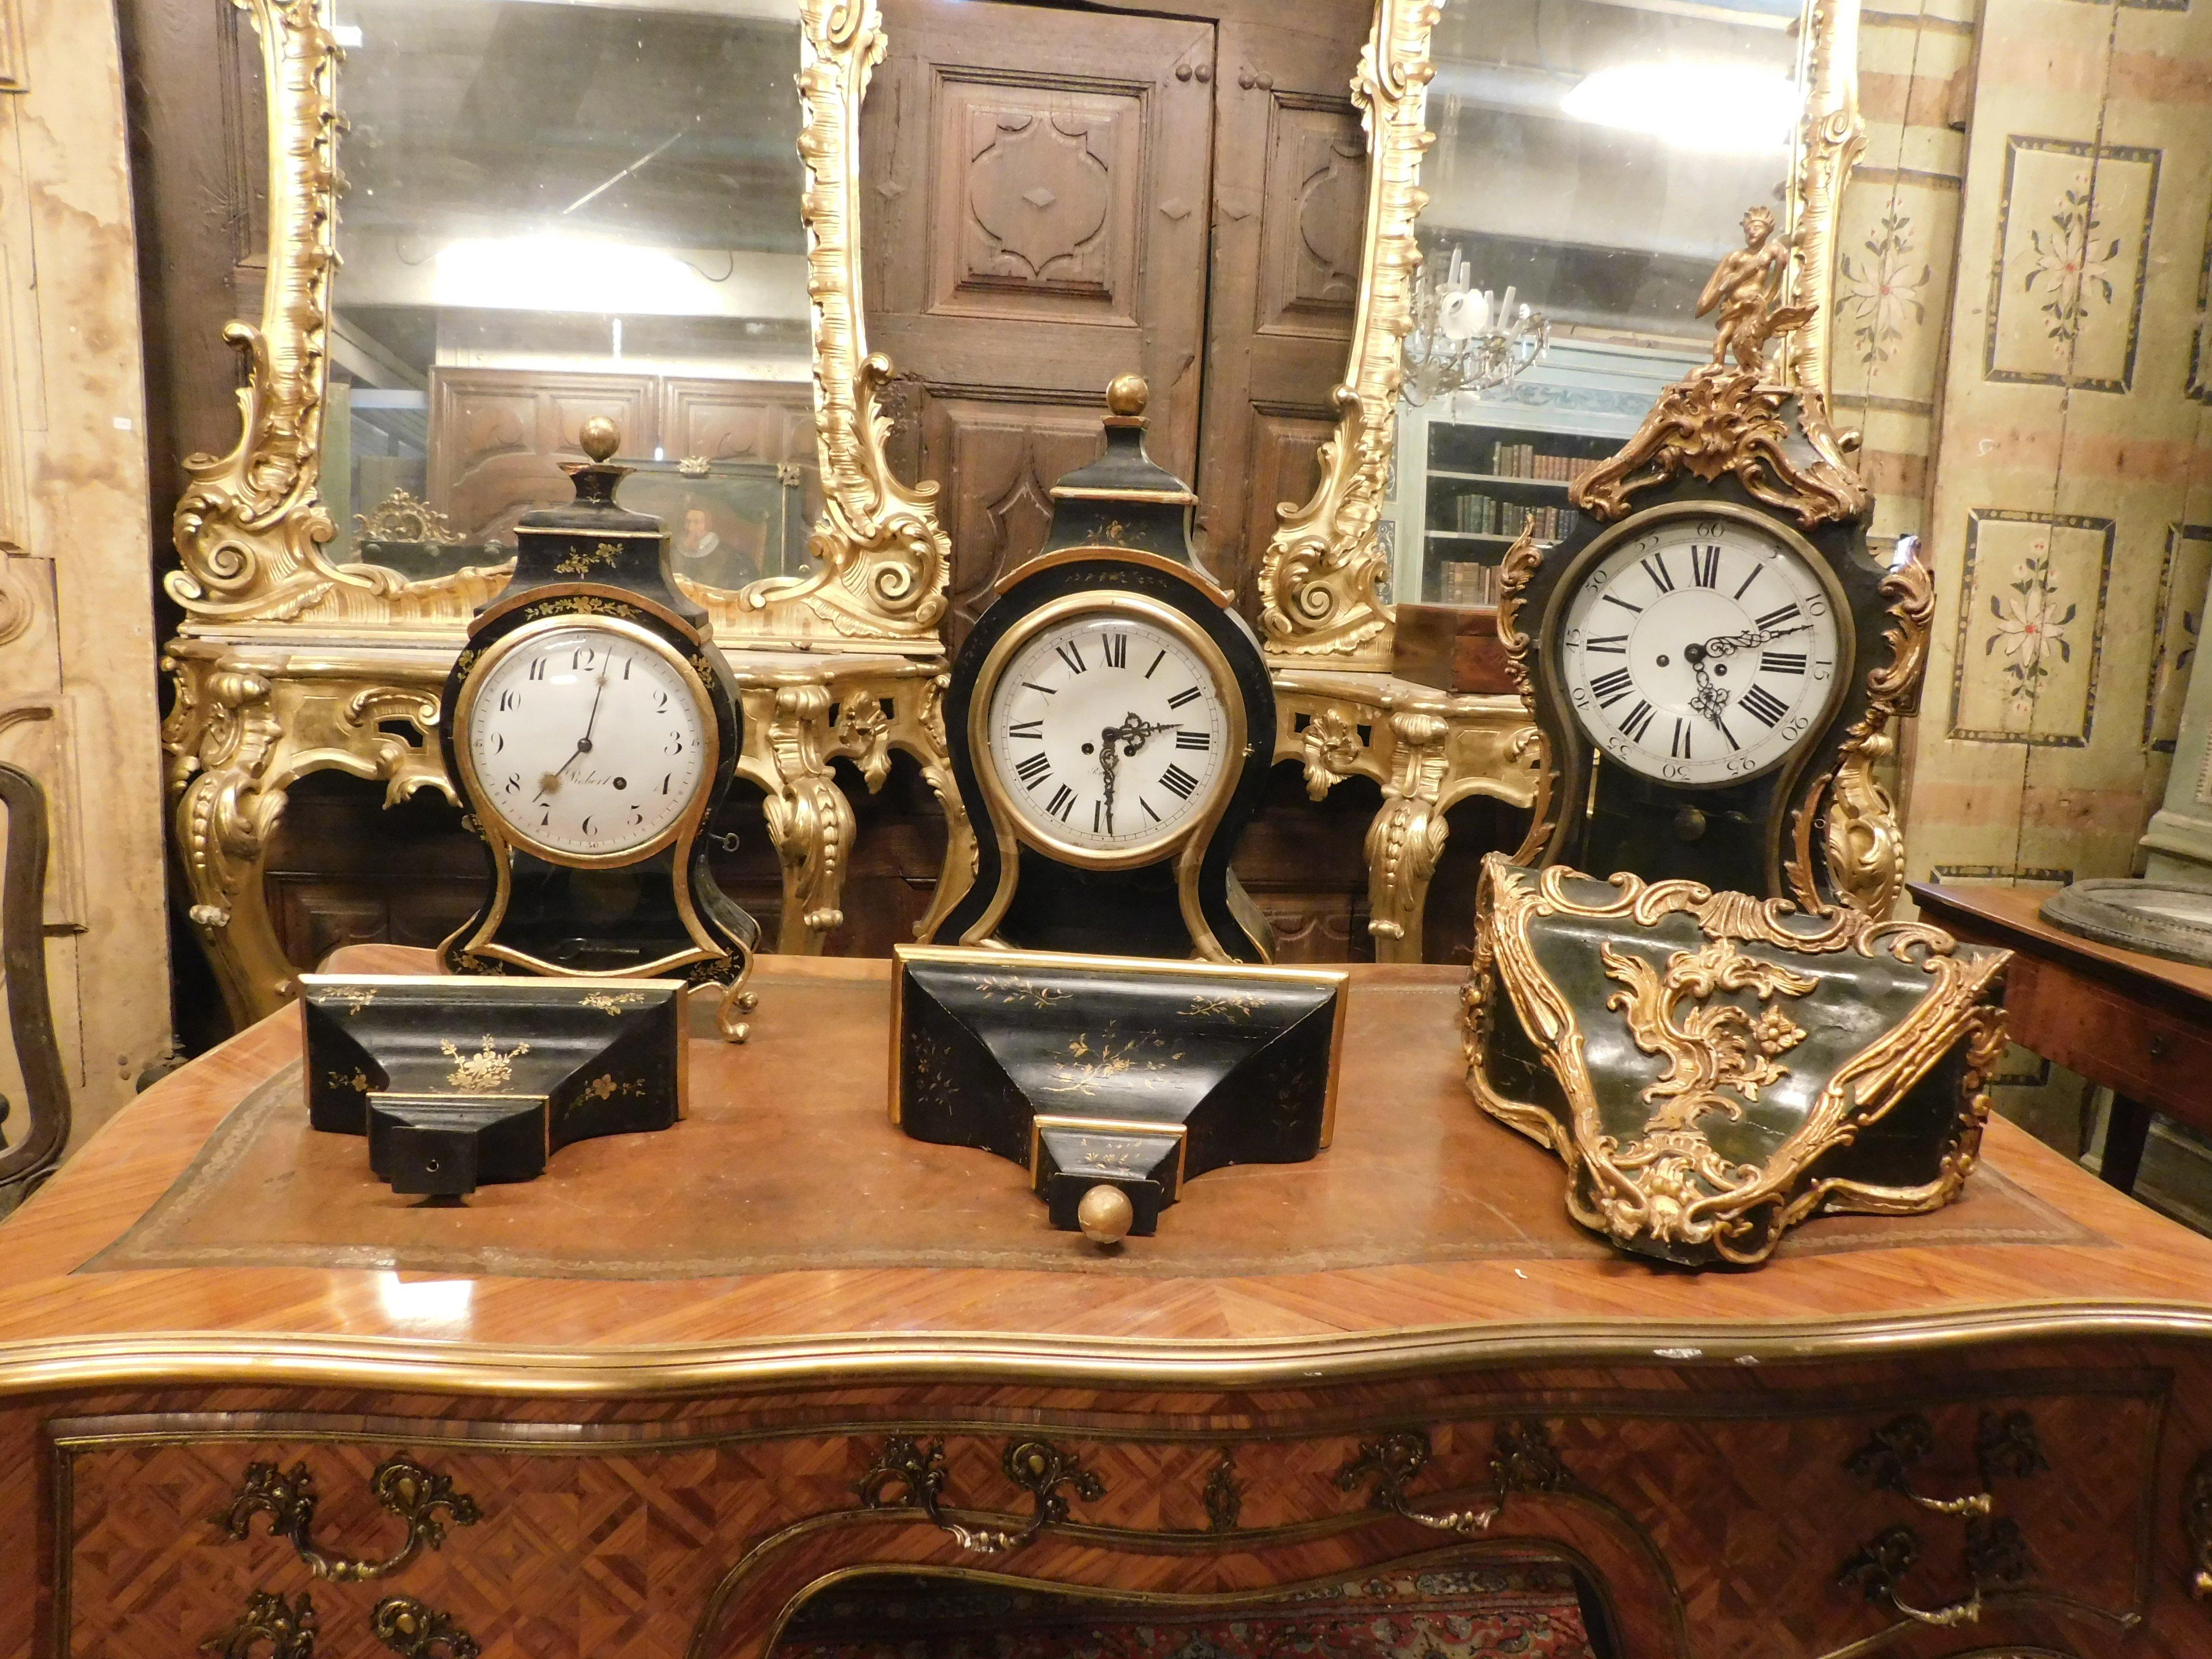 set of 3 clocks in ebonized wood with profiles and feet decorated by hand with gilded plant motifs, from the 19th century, two of three with the 